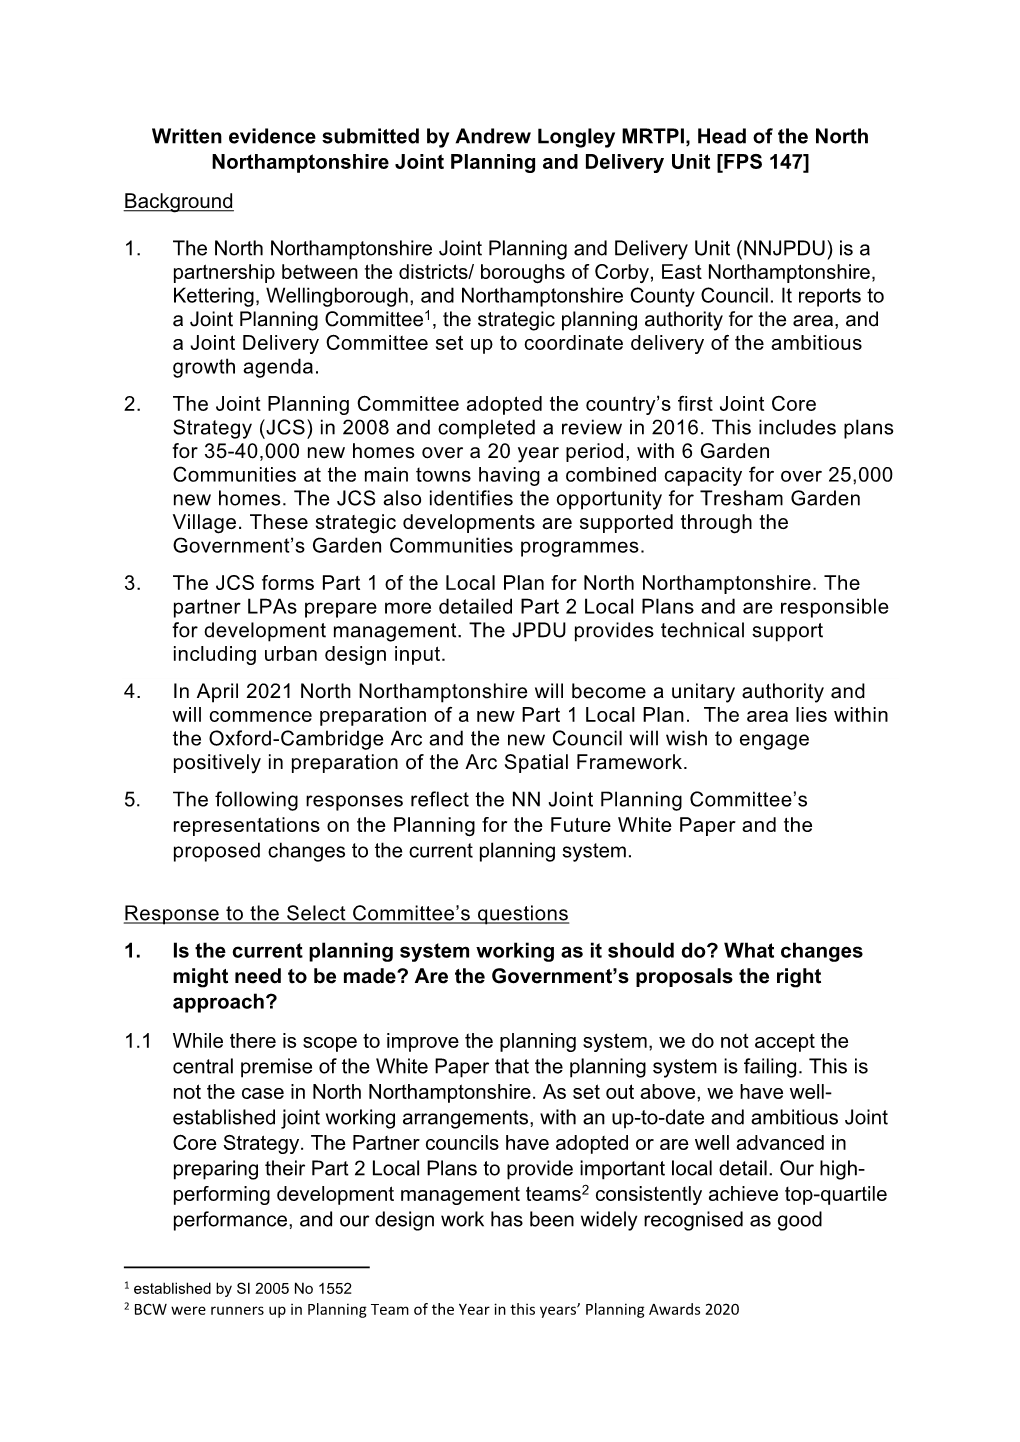 Written Evidence Submitted by Andrew Longley MRTPI, Head of the North Northamptonshire Joint Planning and Delivery Unit [FPS 147] Background